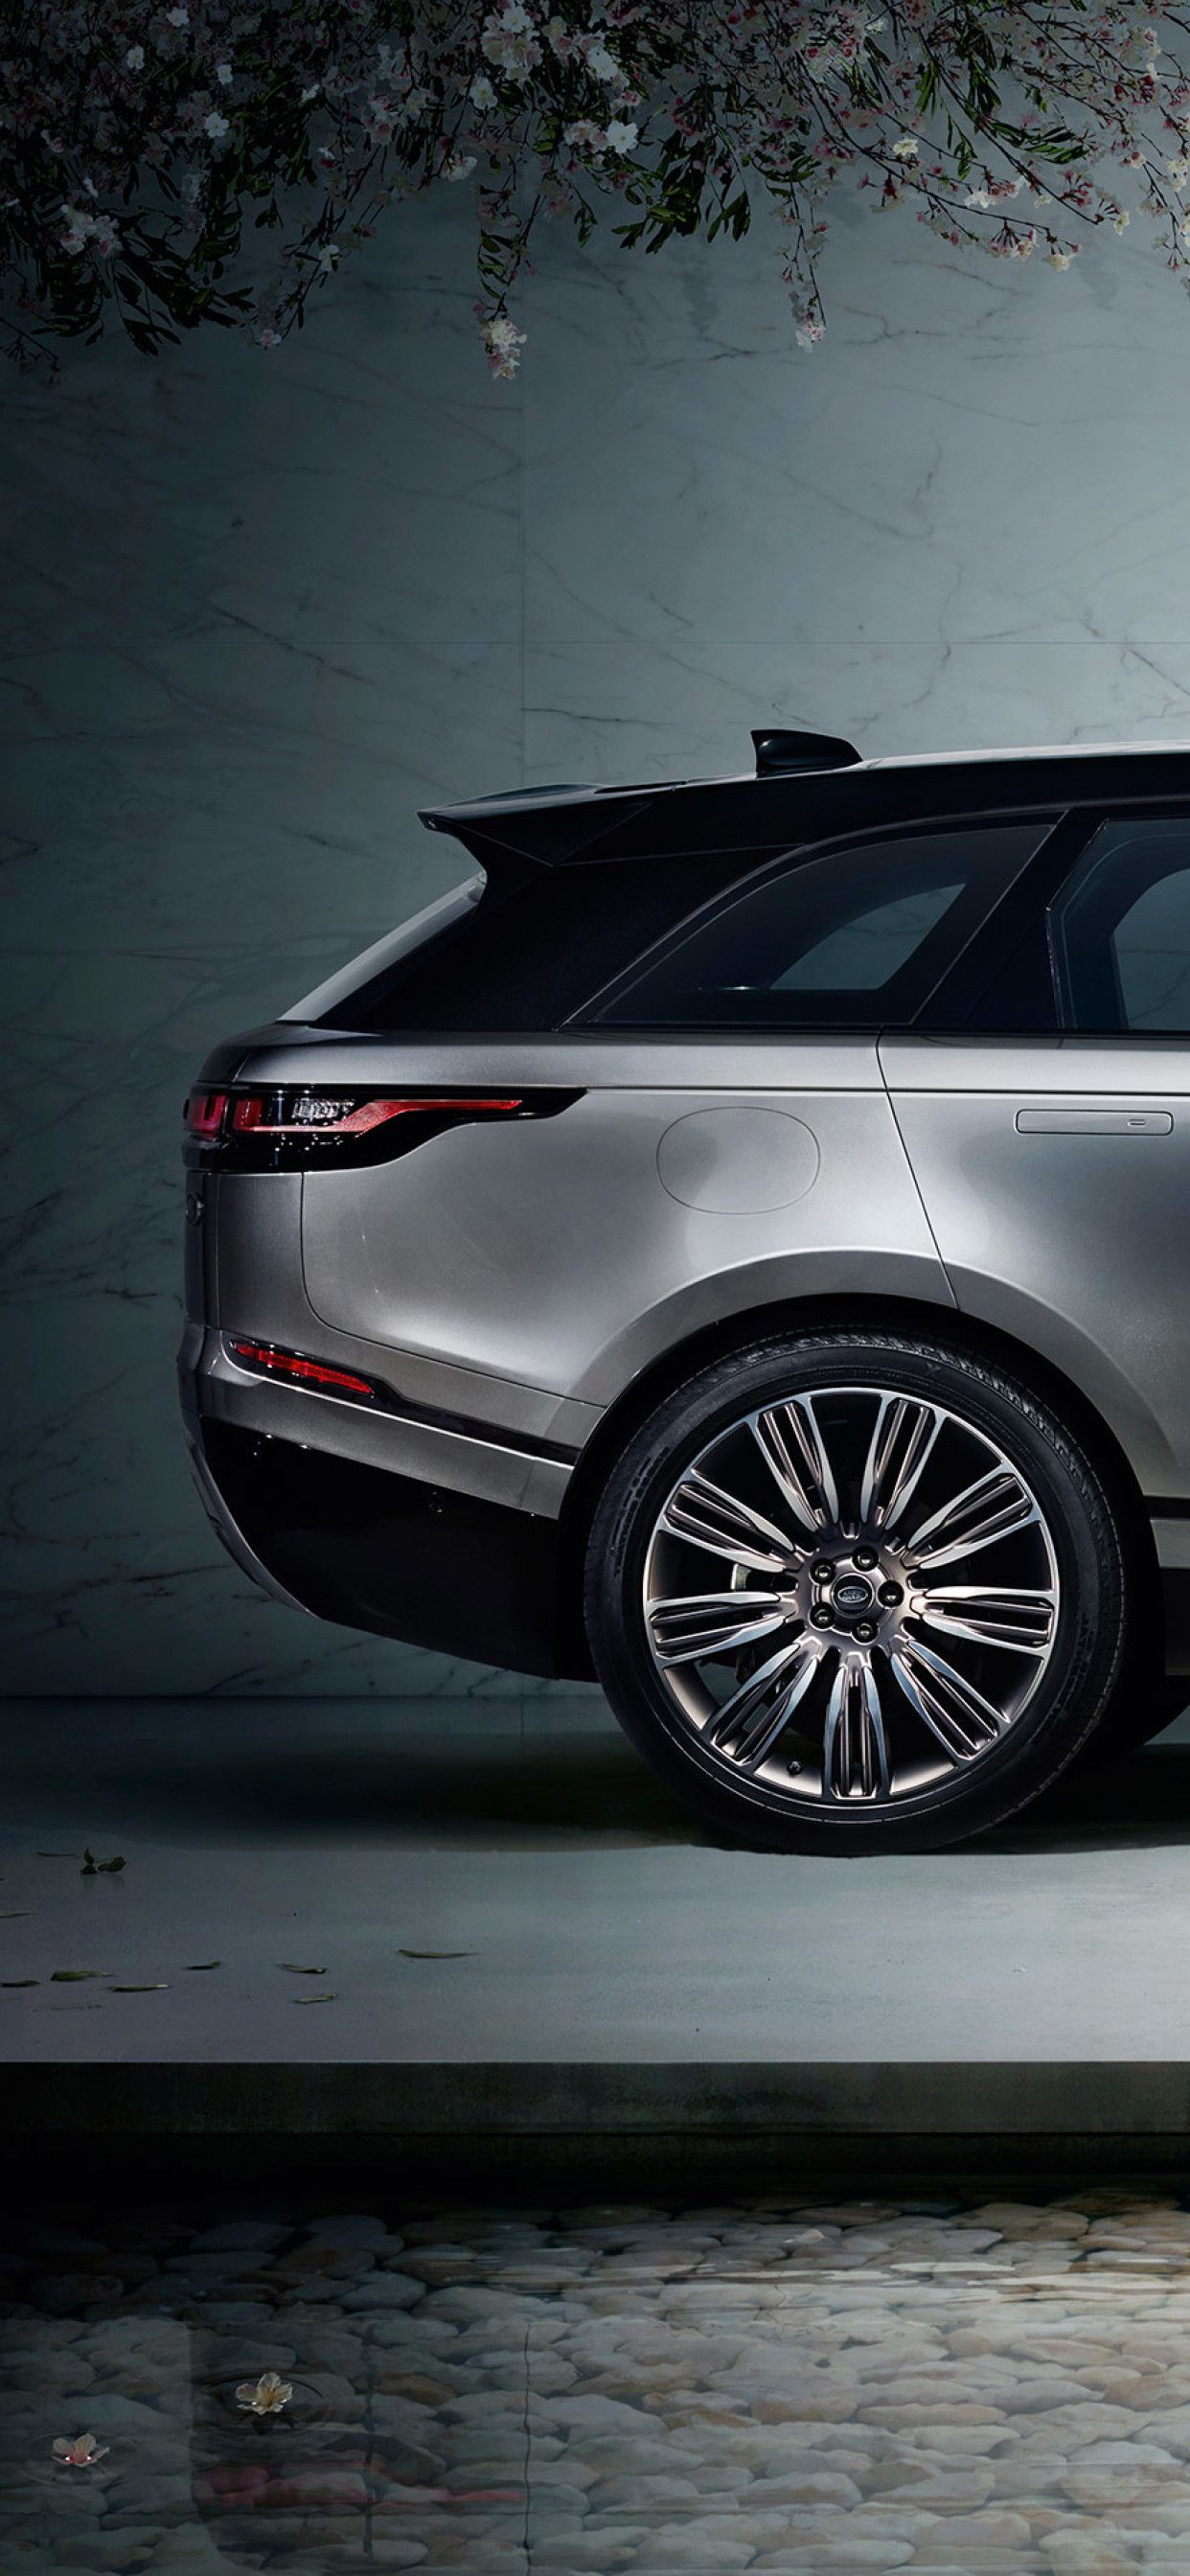 INTRODUCING THE NEW RANGE ROVER SPORT | Land Rover Media Newsroom